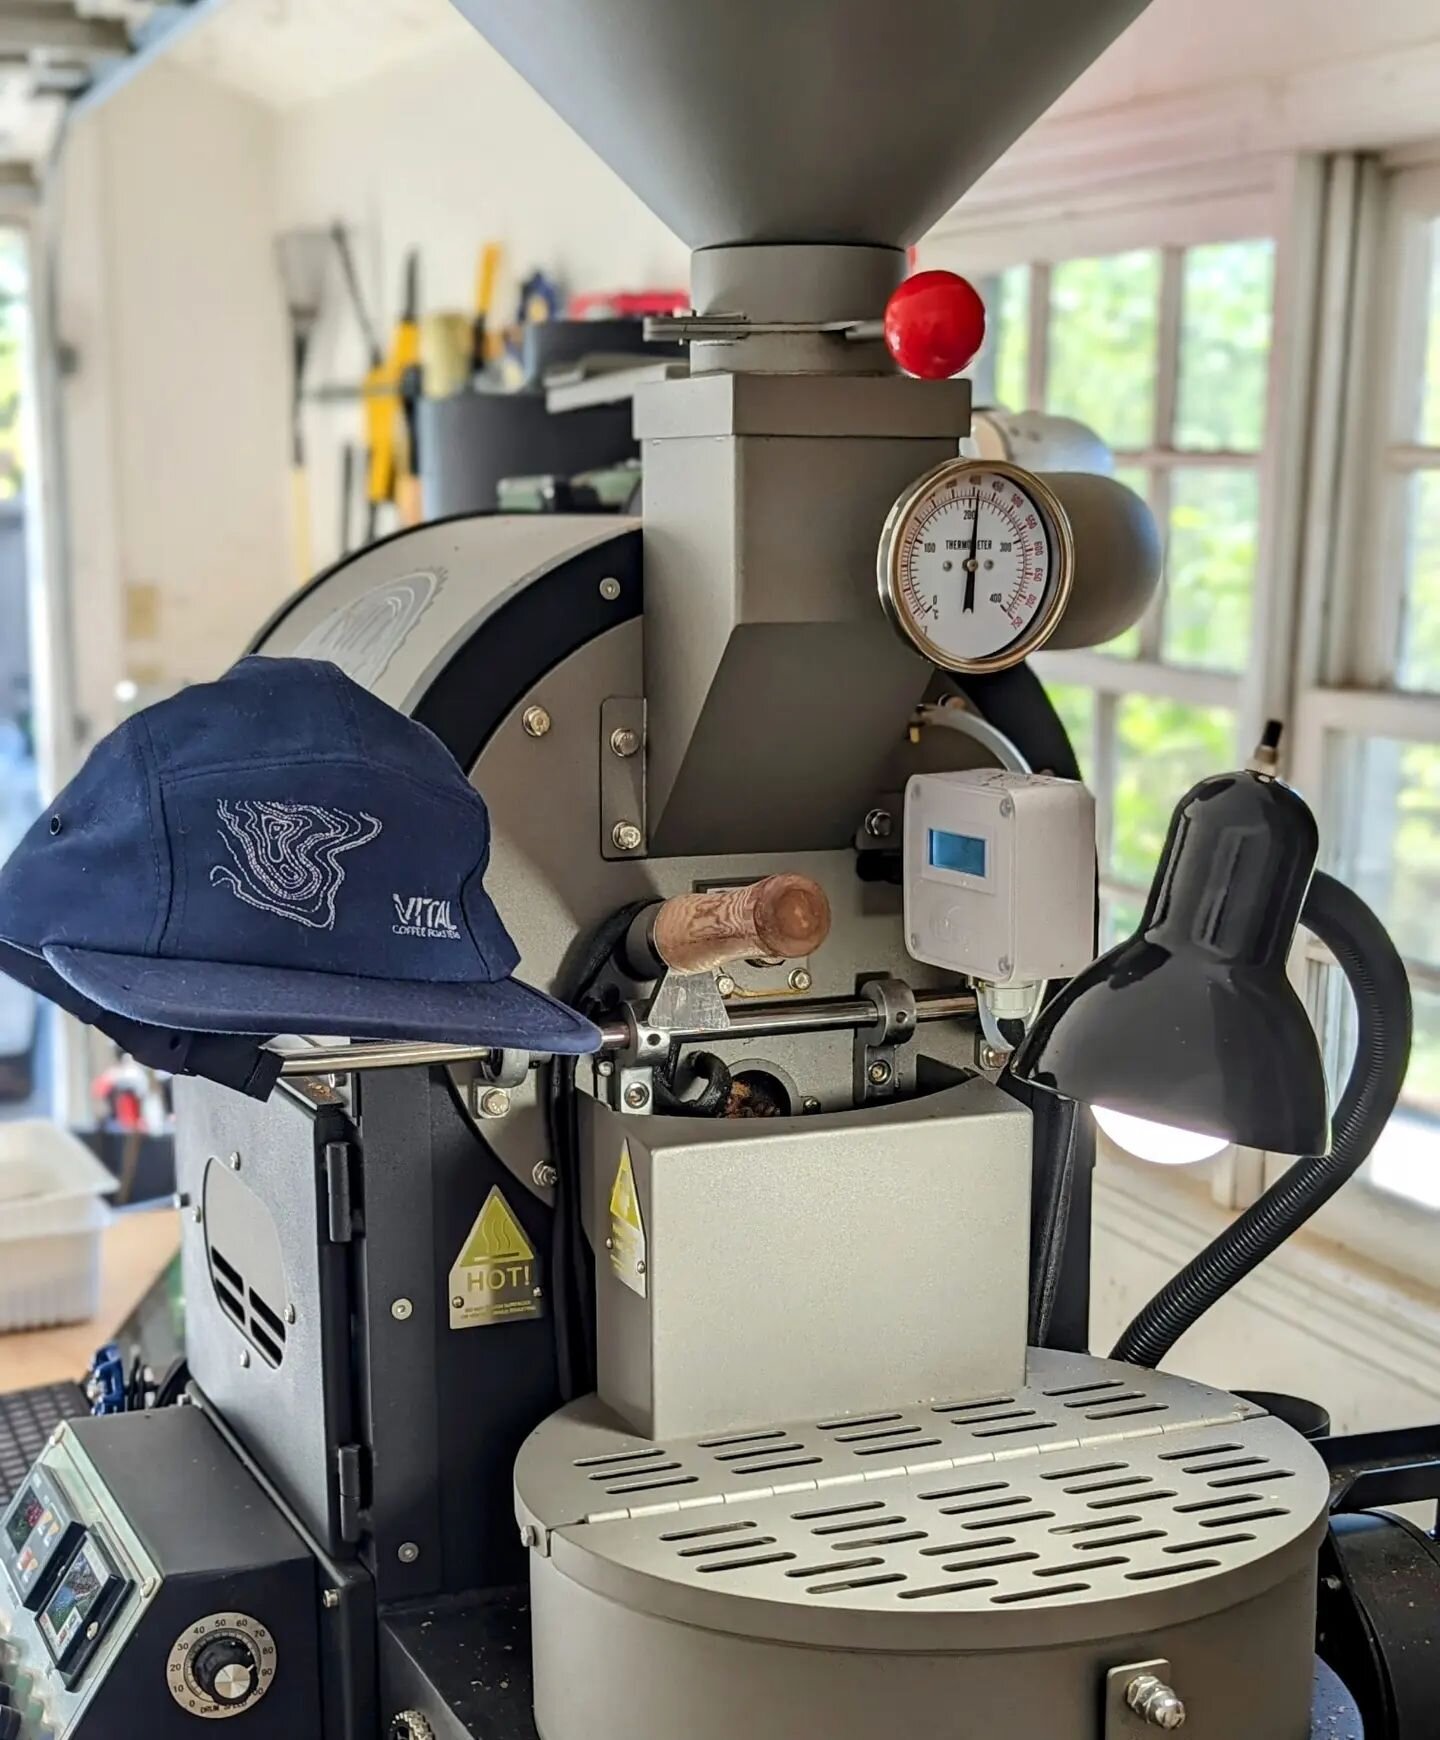 &quot;Hard&quot; hats on baby... IT'S ROAST DAY!!!

Psst... You can get your own hat via the link in our bio

#arkansascoffee #arkansascoffeeroaster #fortsmithcoffee #specialtycoffee #coffeeroaster